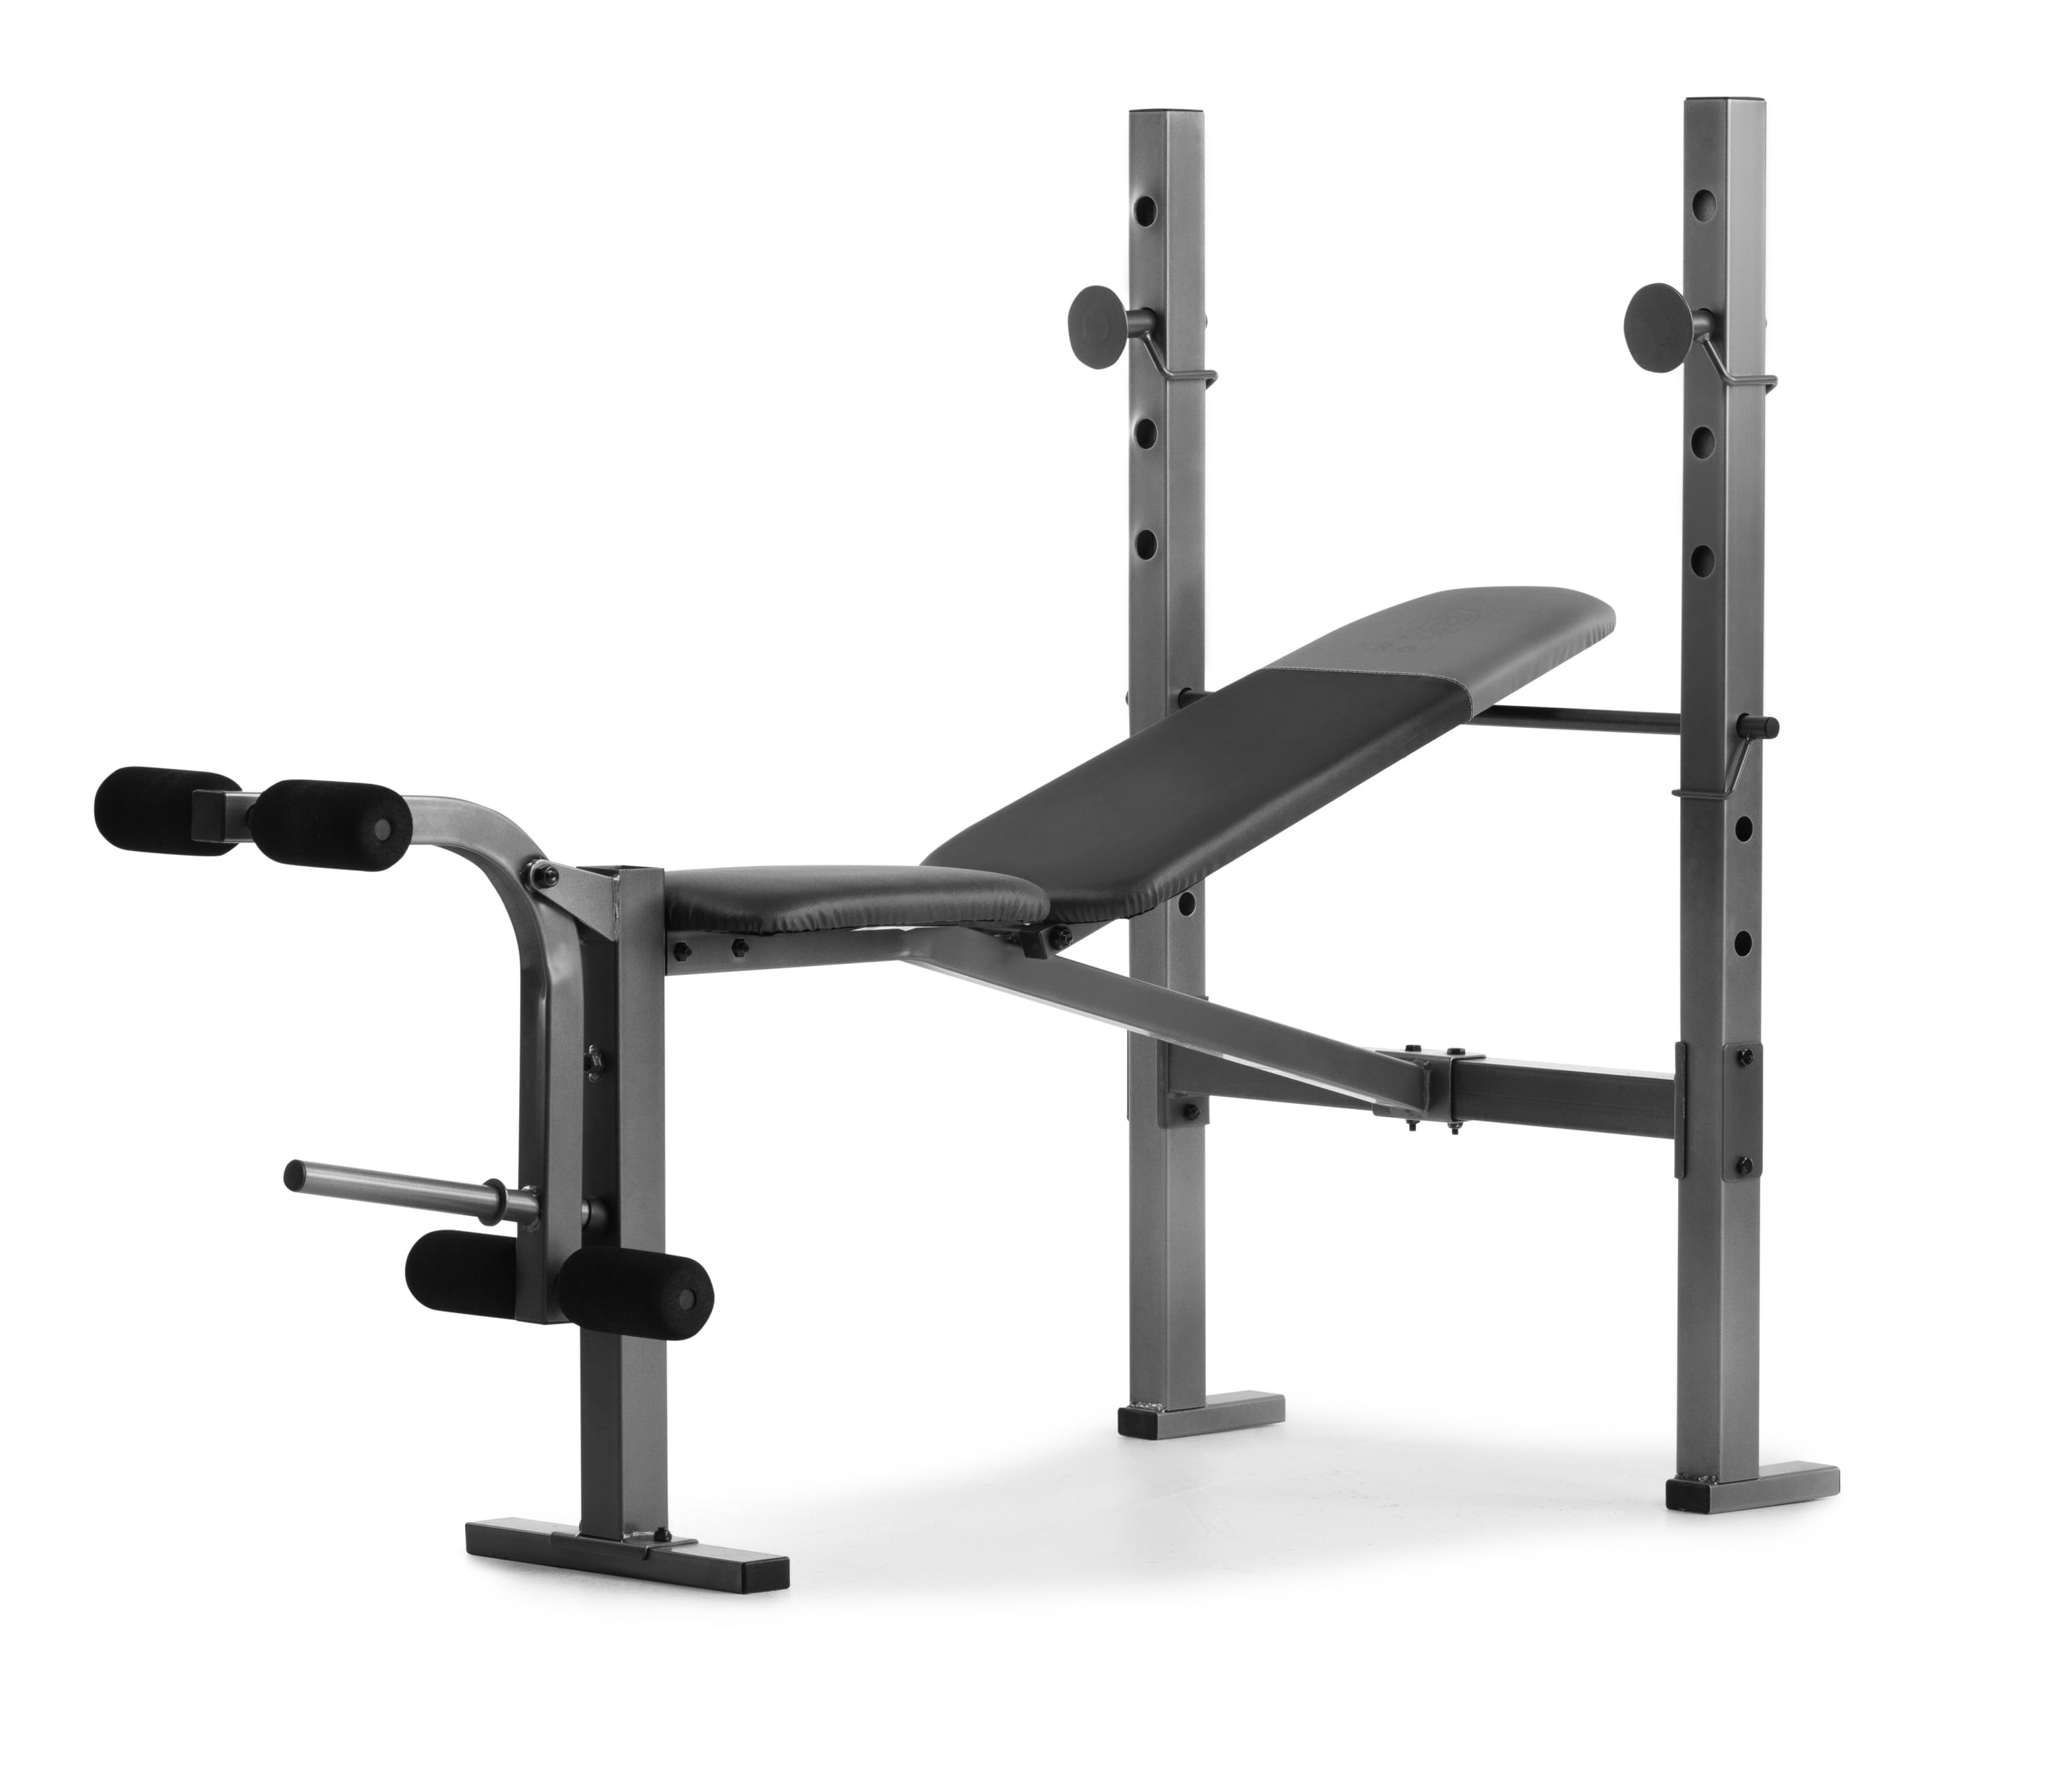 Weider XR 5.9 Adjustable Slant Workout Bench FREE SHIPPING! NEW 